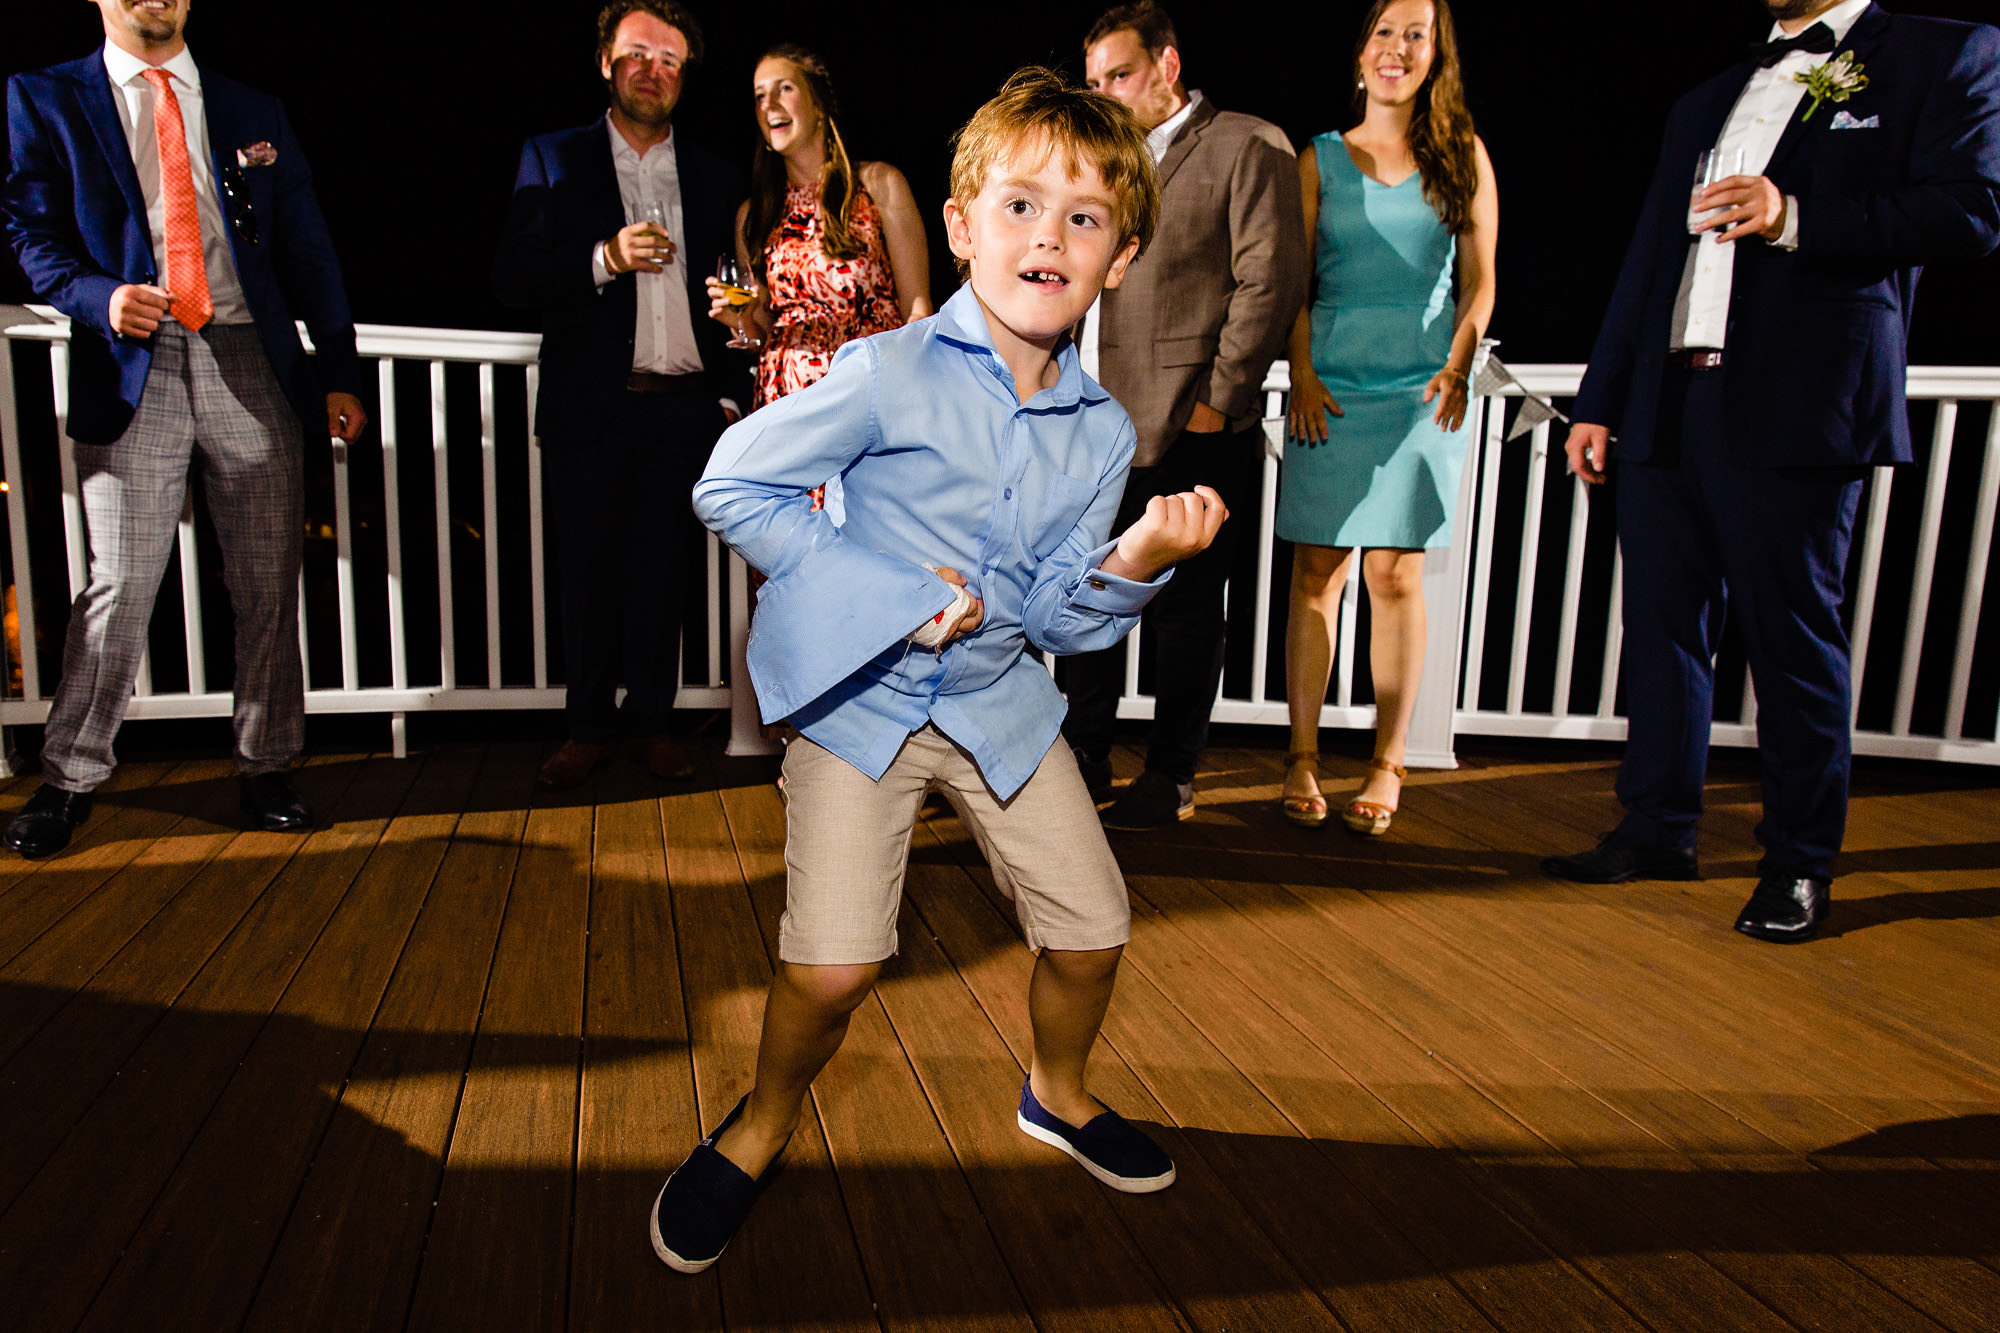 The bride, groom, and their guests dance on the Bar Harbor Inn's porch as night falls